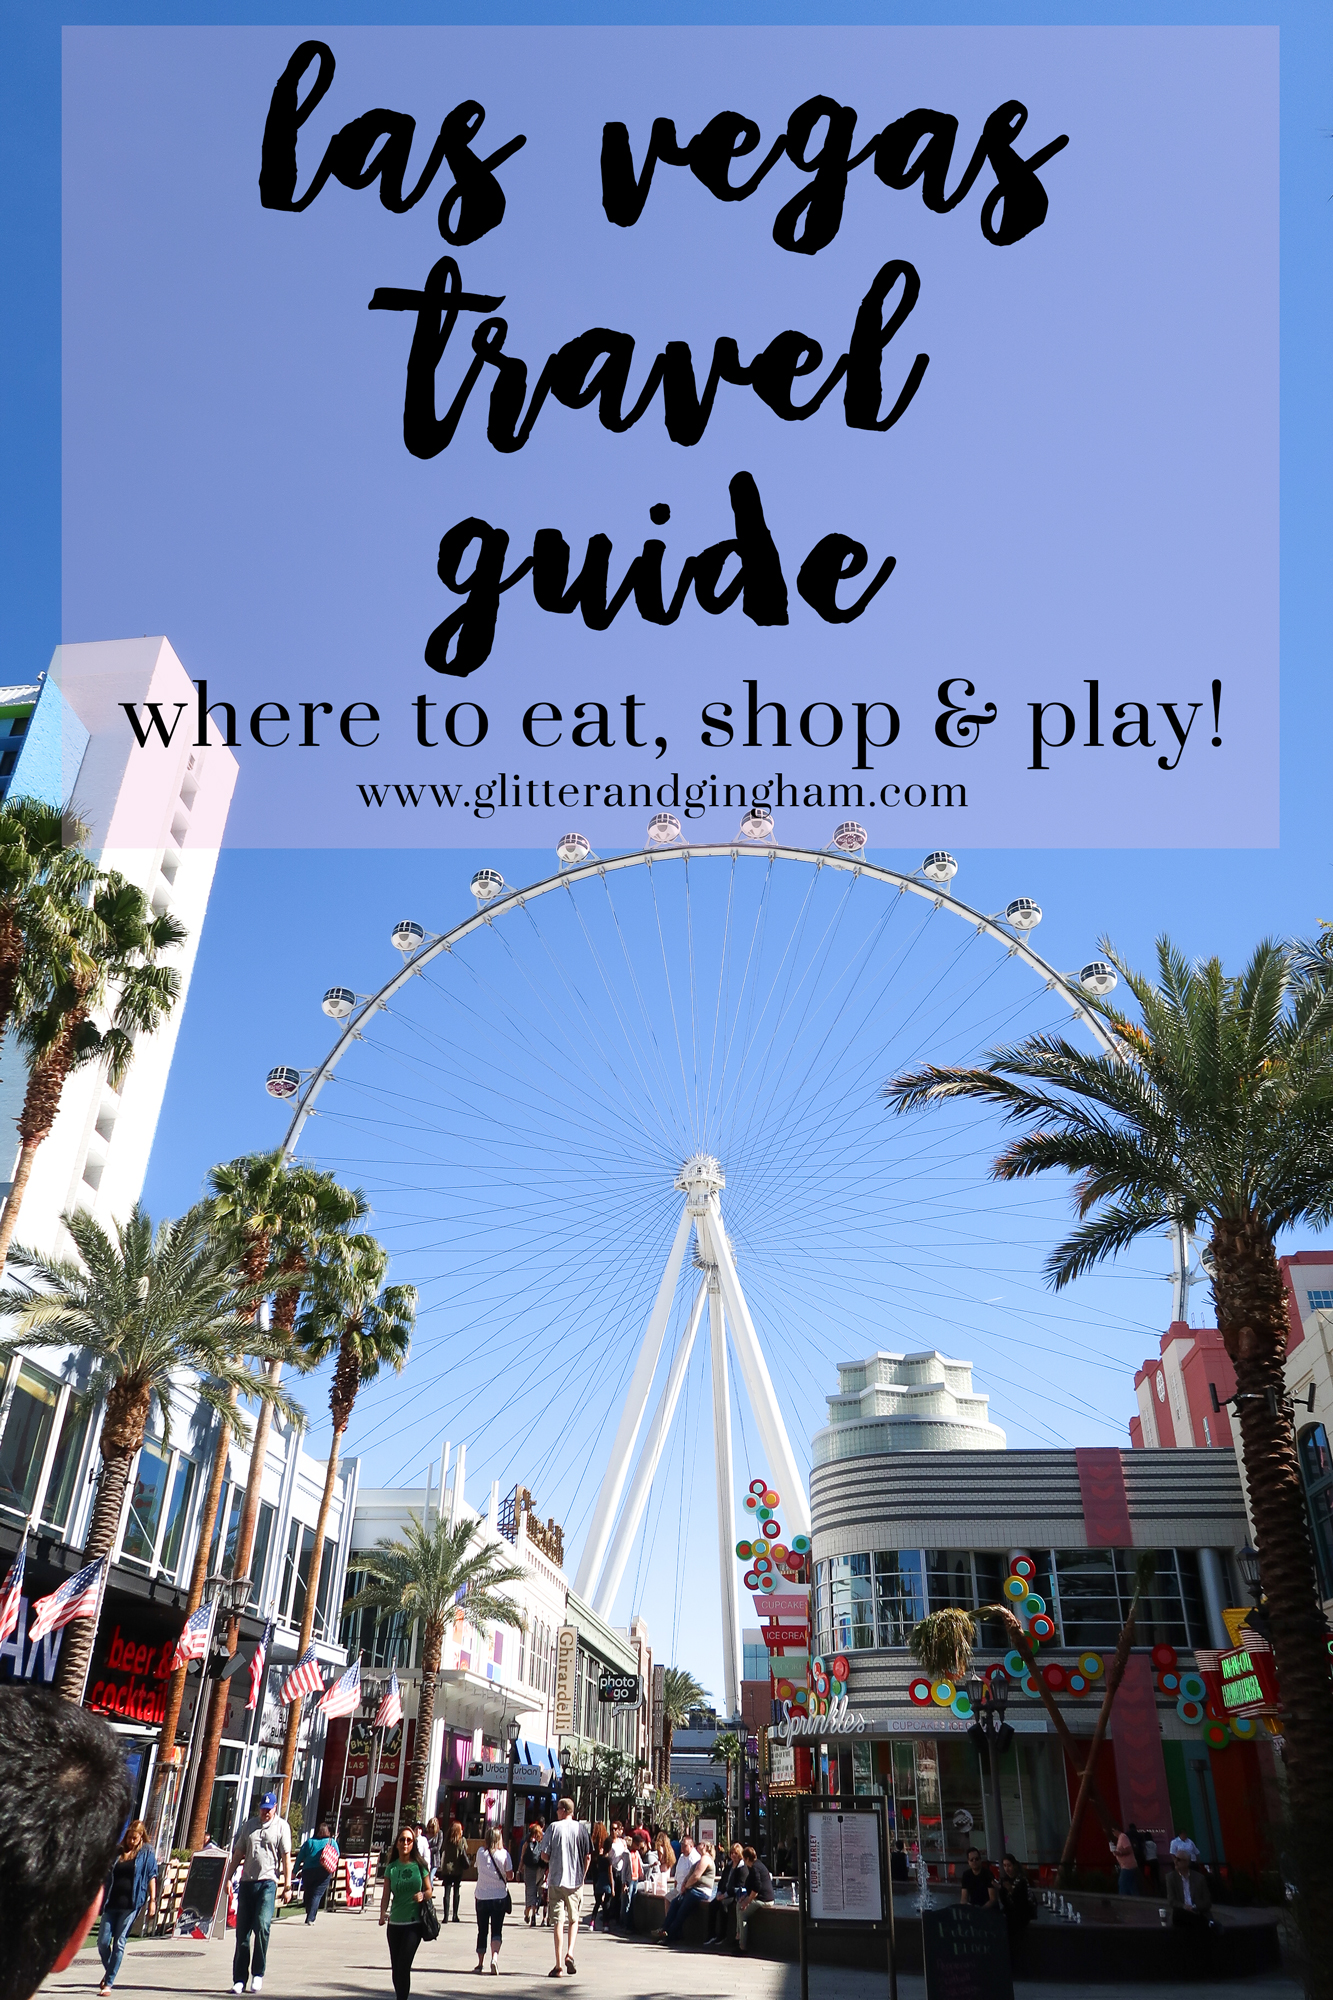 Las Vegas Travel Guide via Glitter & Gingham // What to do in Las Vegas: where to eat, shop & play